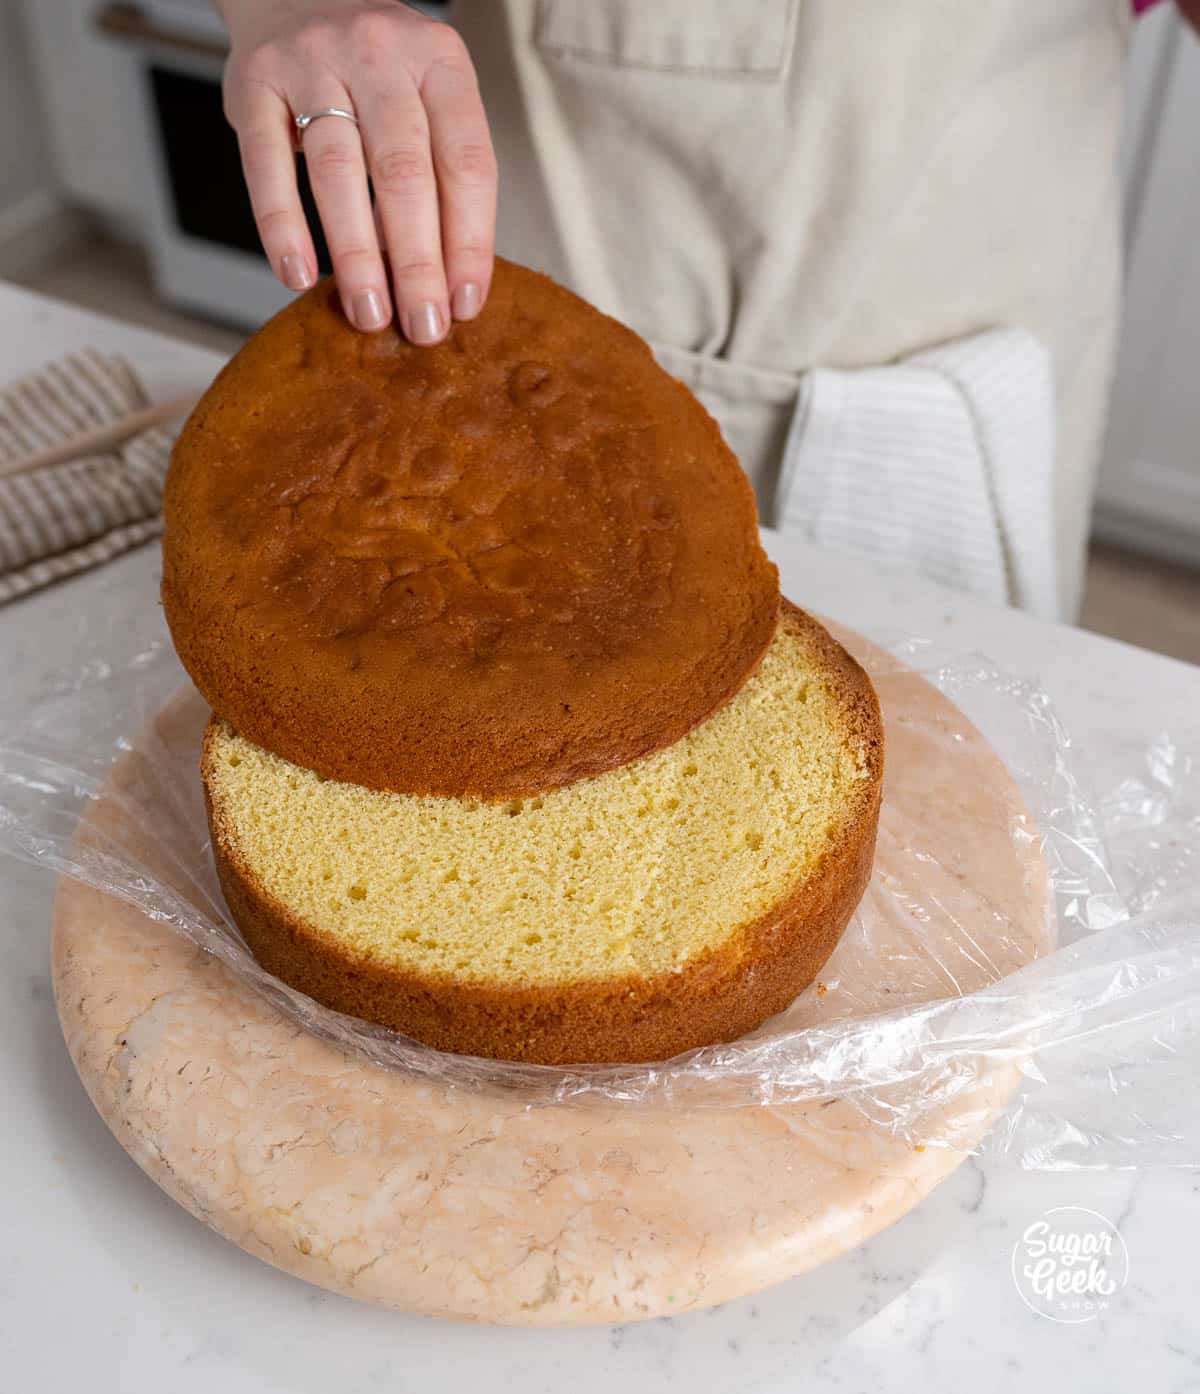 hand removing the dome from the top of a yellow cake